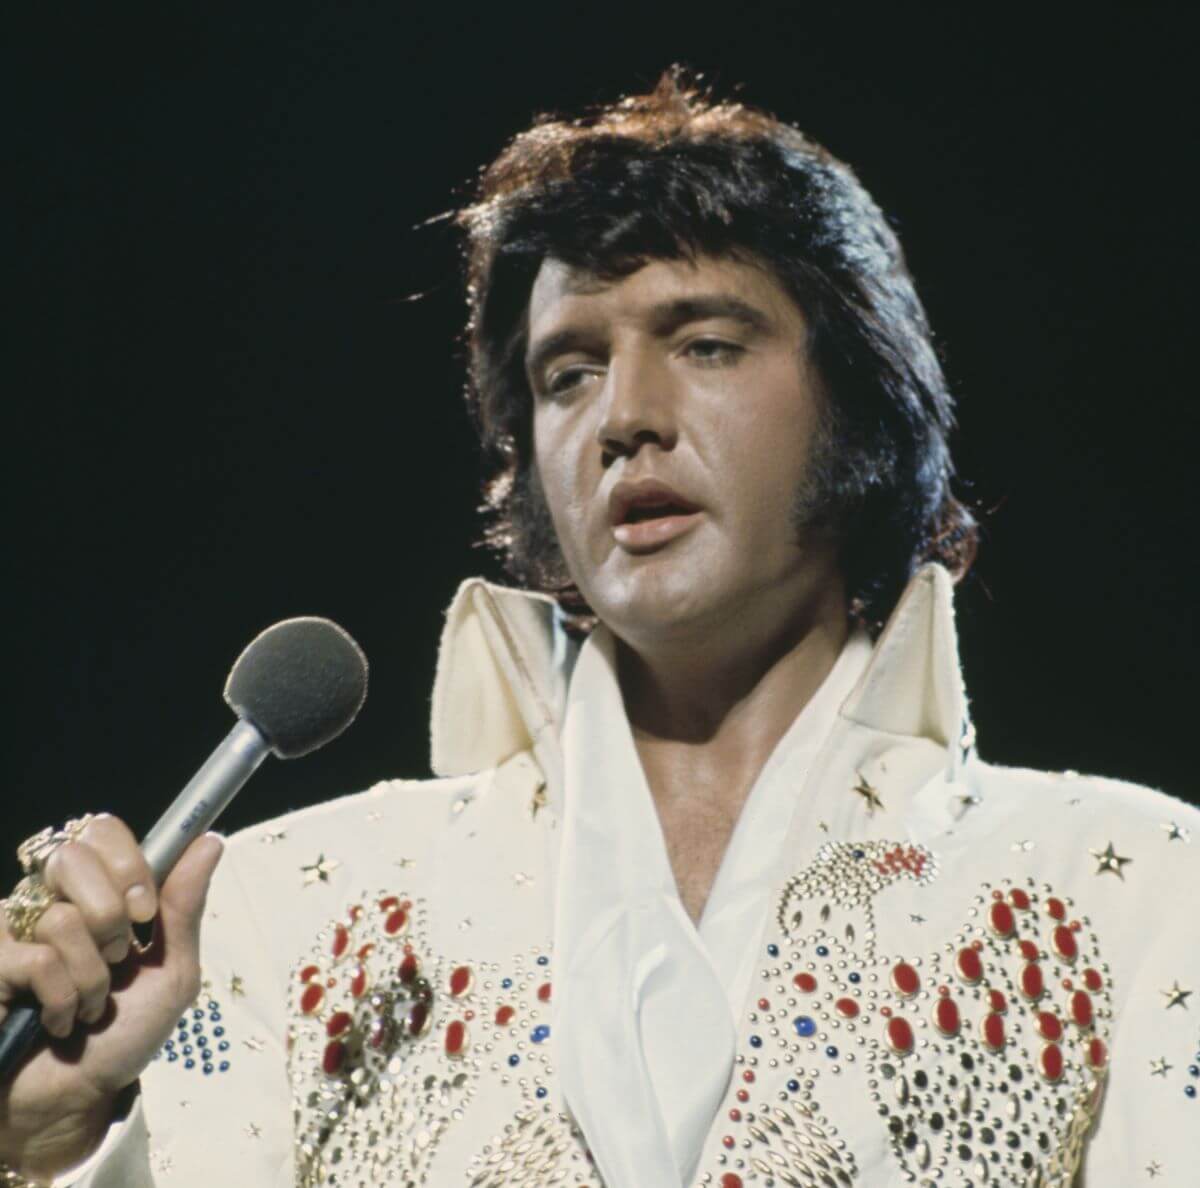 Elvis Presley wears a bedazzled white jumpsuit and holds a microphone.